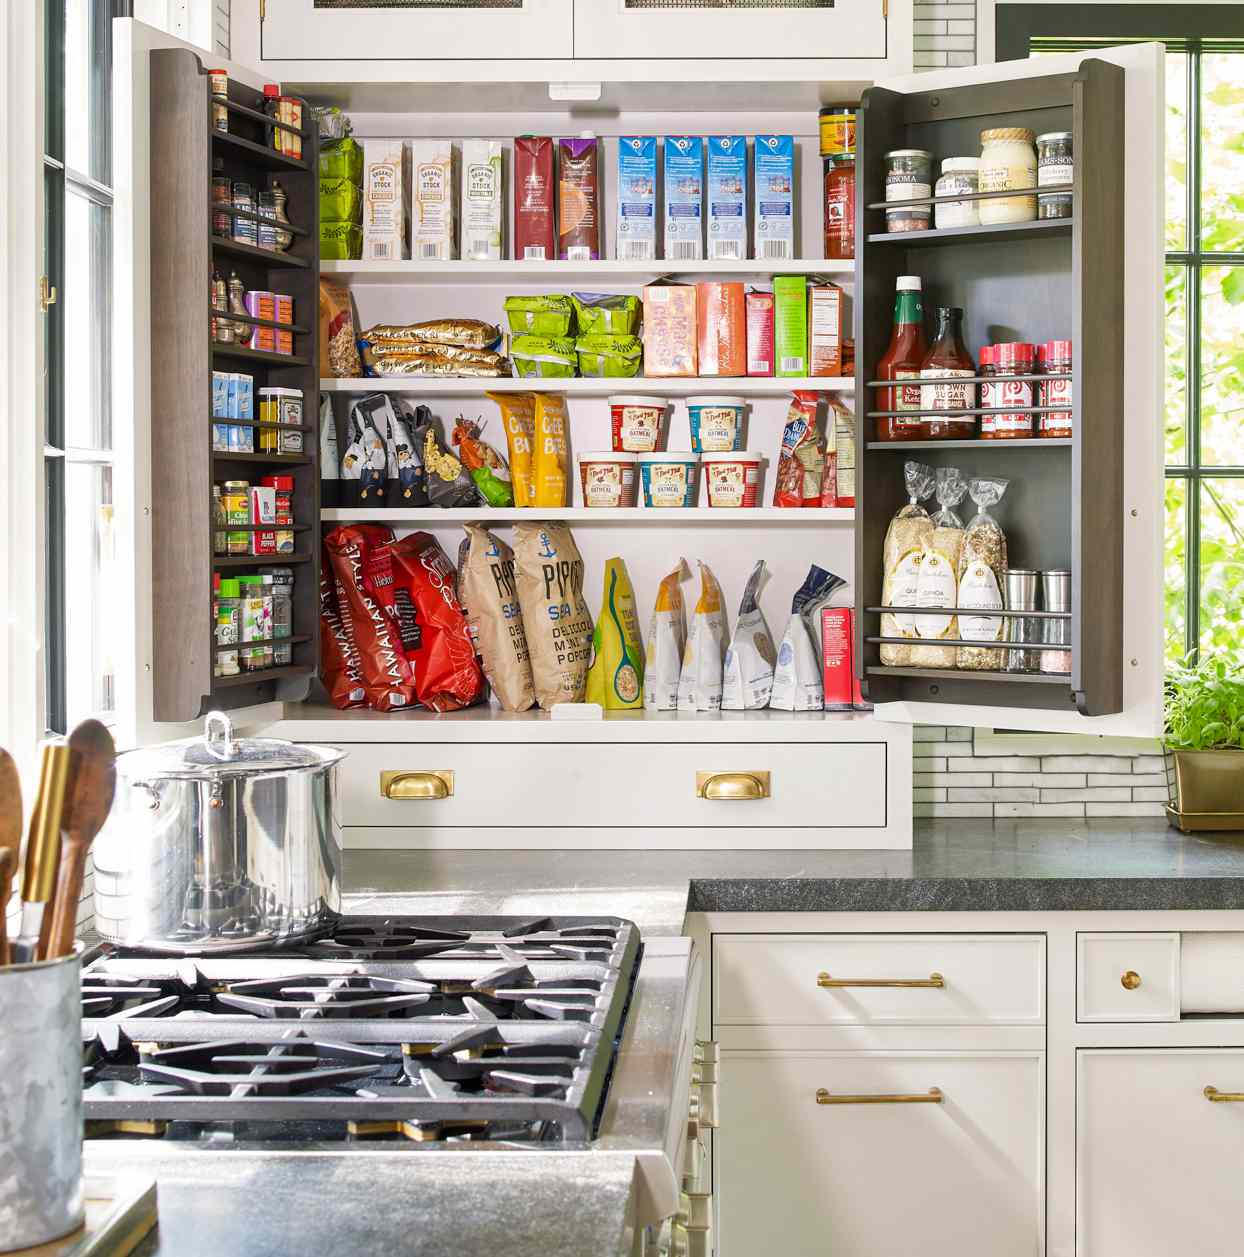 Organizing Kitchen Cabinets, How To Arrange Dishes In Kitchen Cabinets